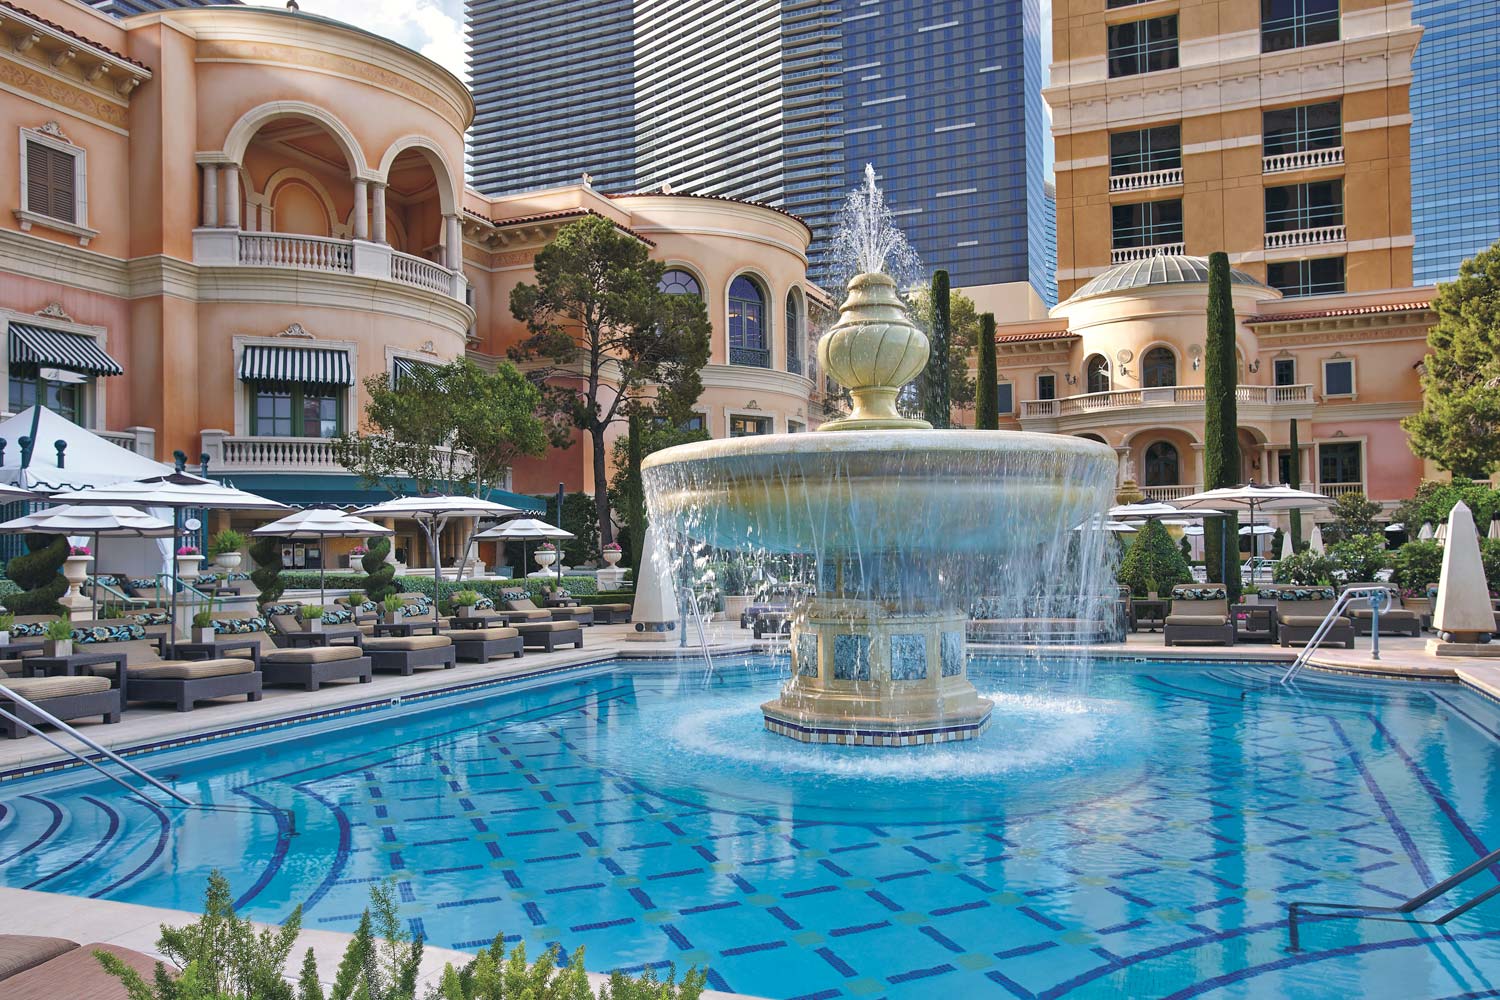 Bellagio in Las Vegas: Find Hotel Reviews, Rooms, and Prices on